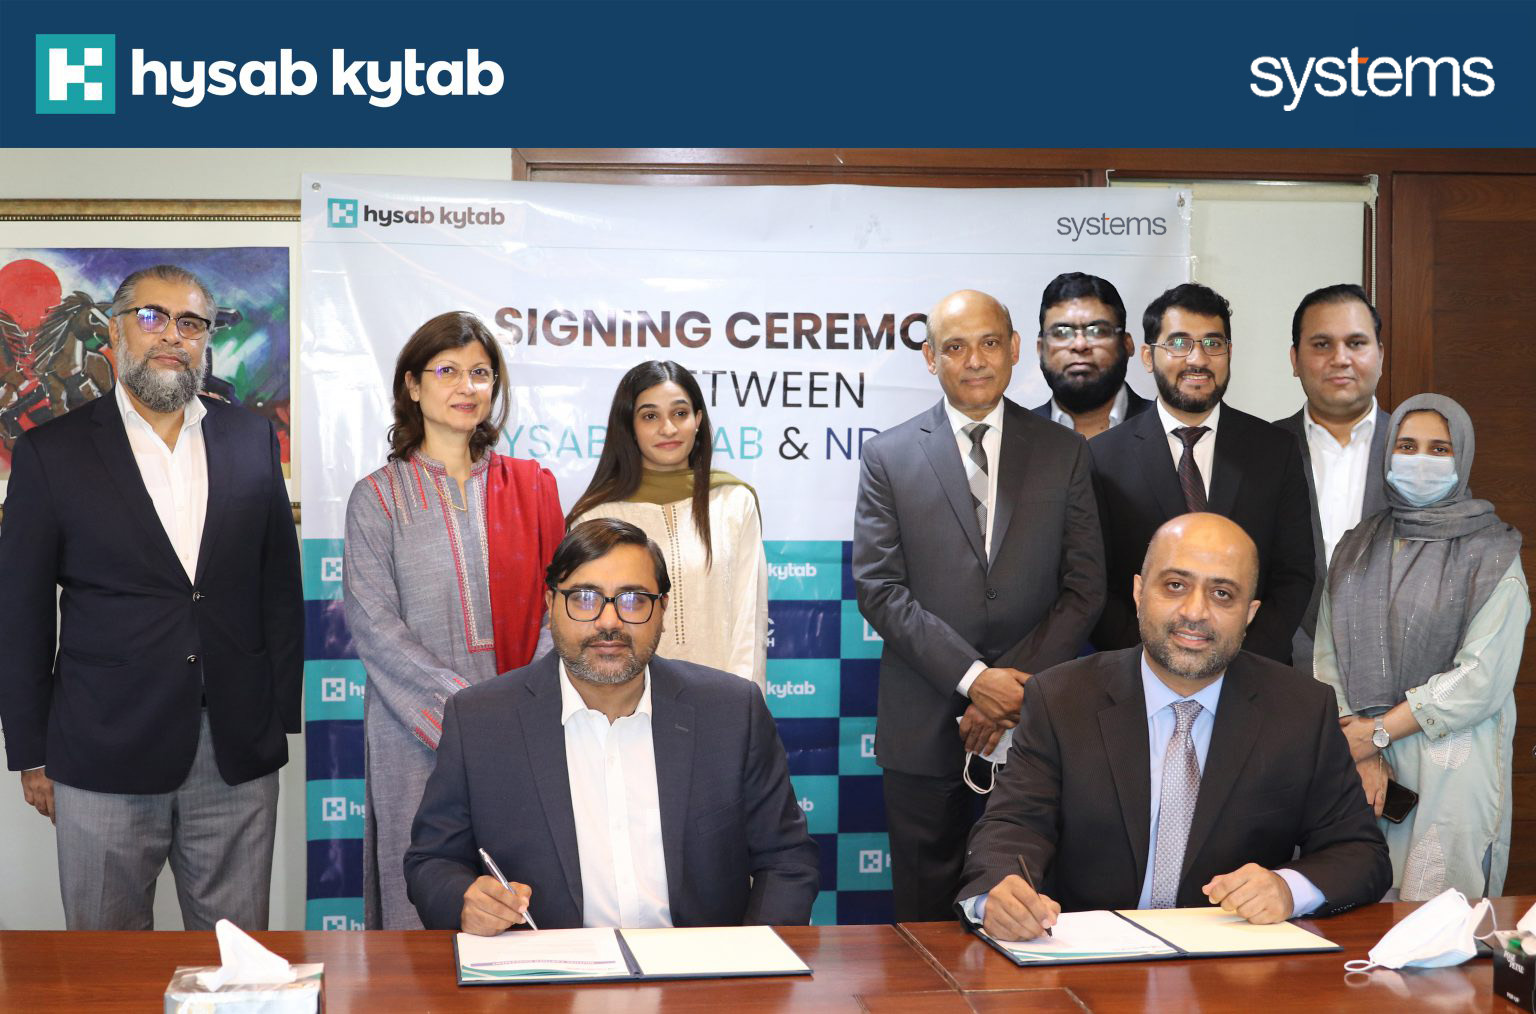 Systems Limited collaborates with Hysab Kytab for advanced financial solutions